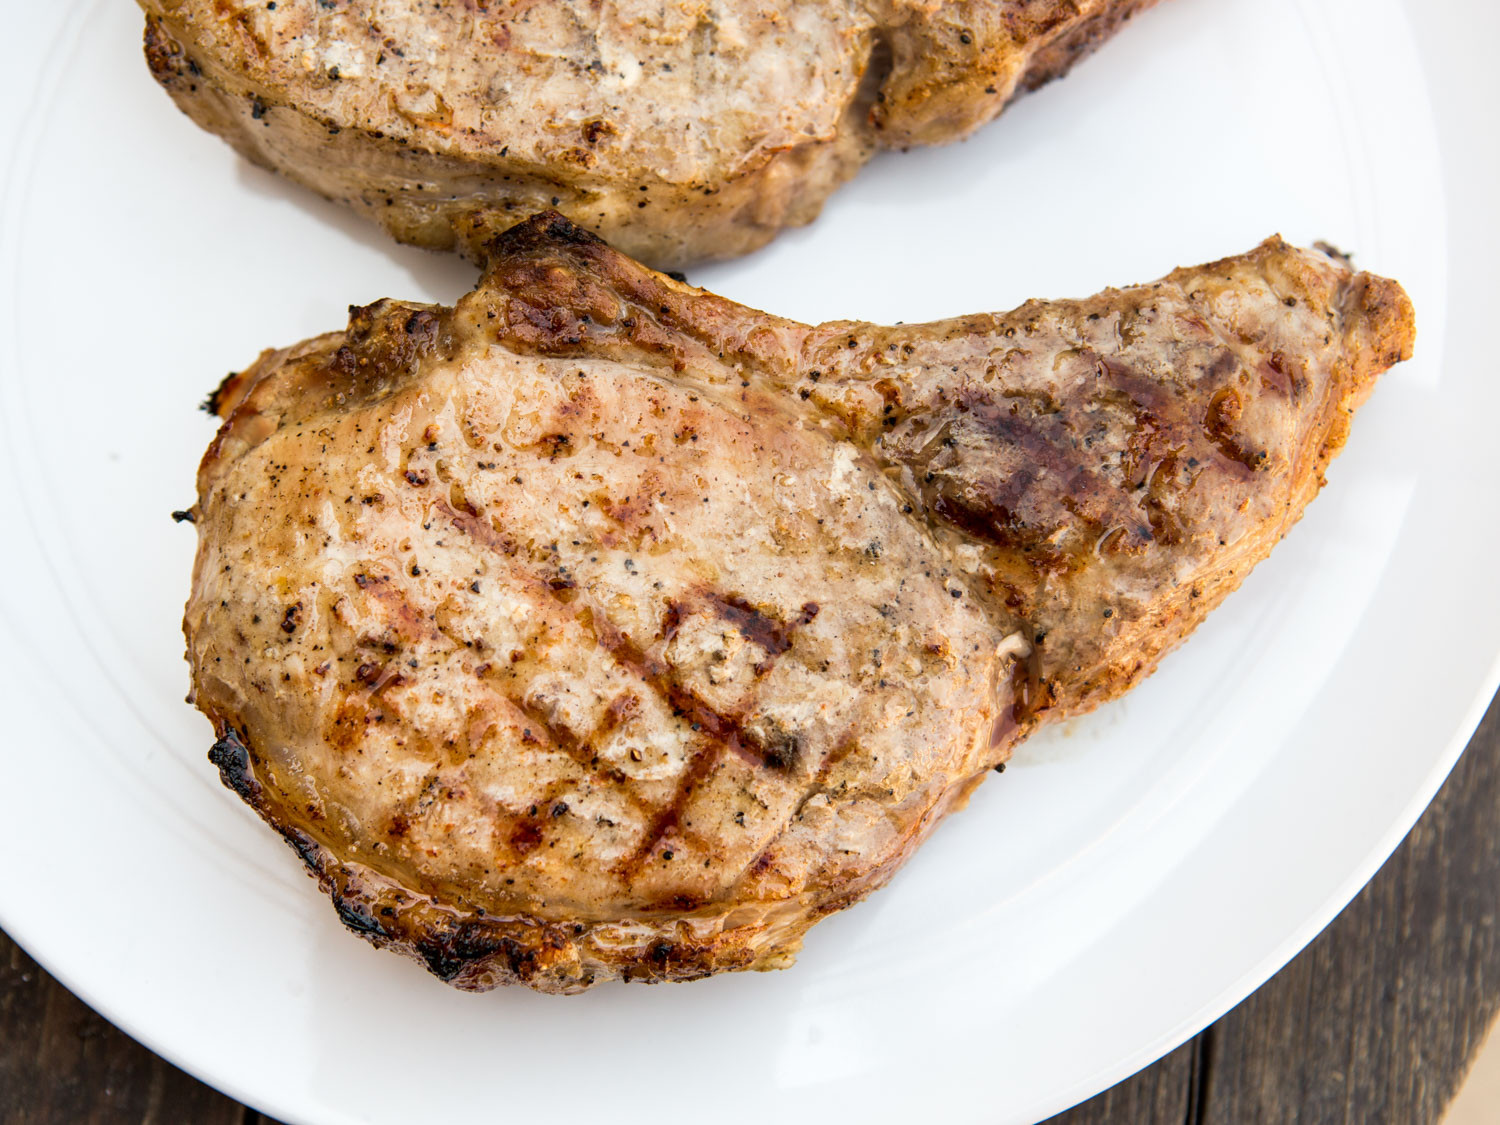 Pork Chops On The Grill Recipes
 The Best Juicy Grilled Pork Chops Recipe